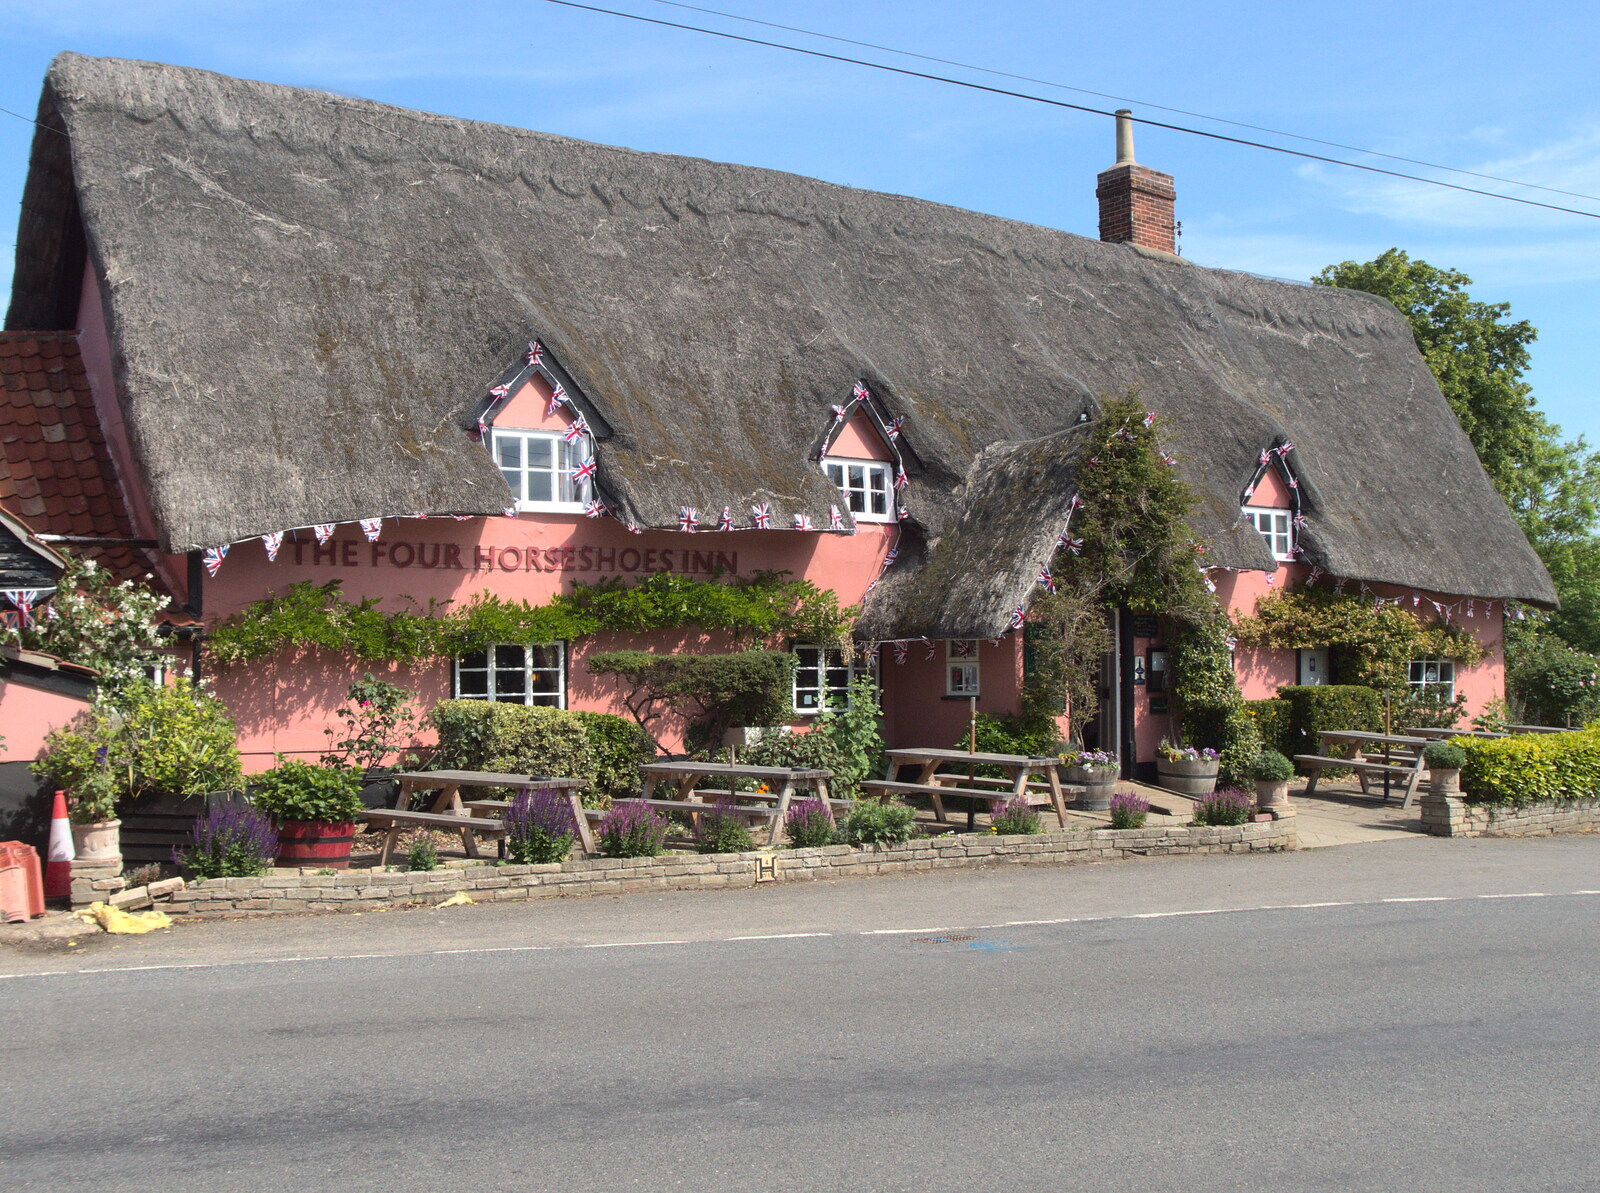 A Bike Ride Miscellany, Brome to Cotton, Suffolk - 6th June 2022: The Four Horseshoes at Thornham